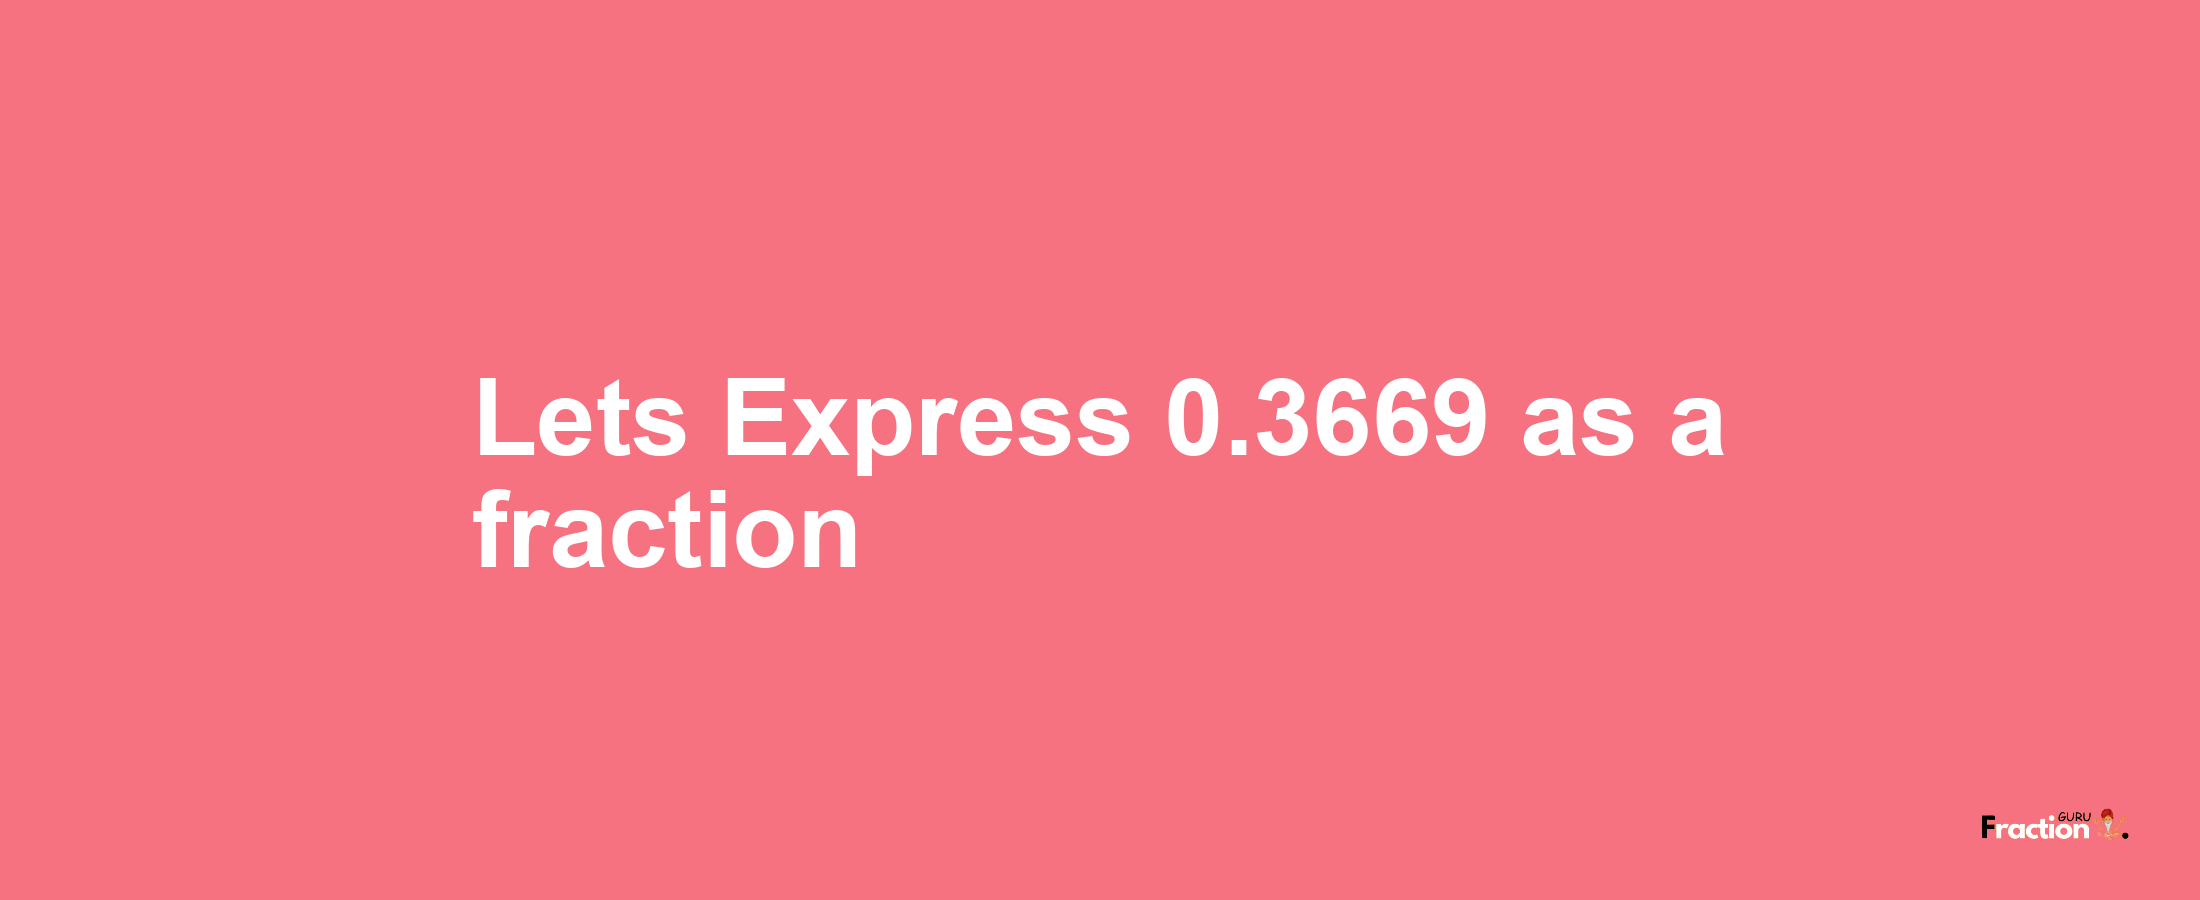 Lets Express 0.3669 as afraction